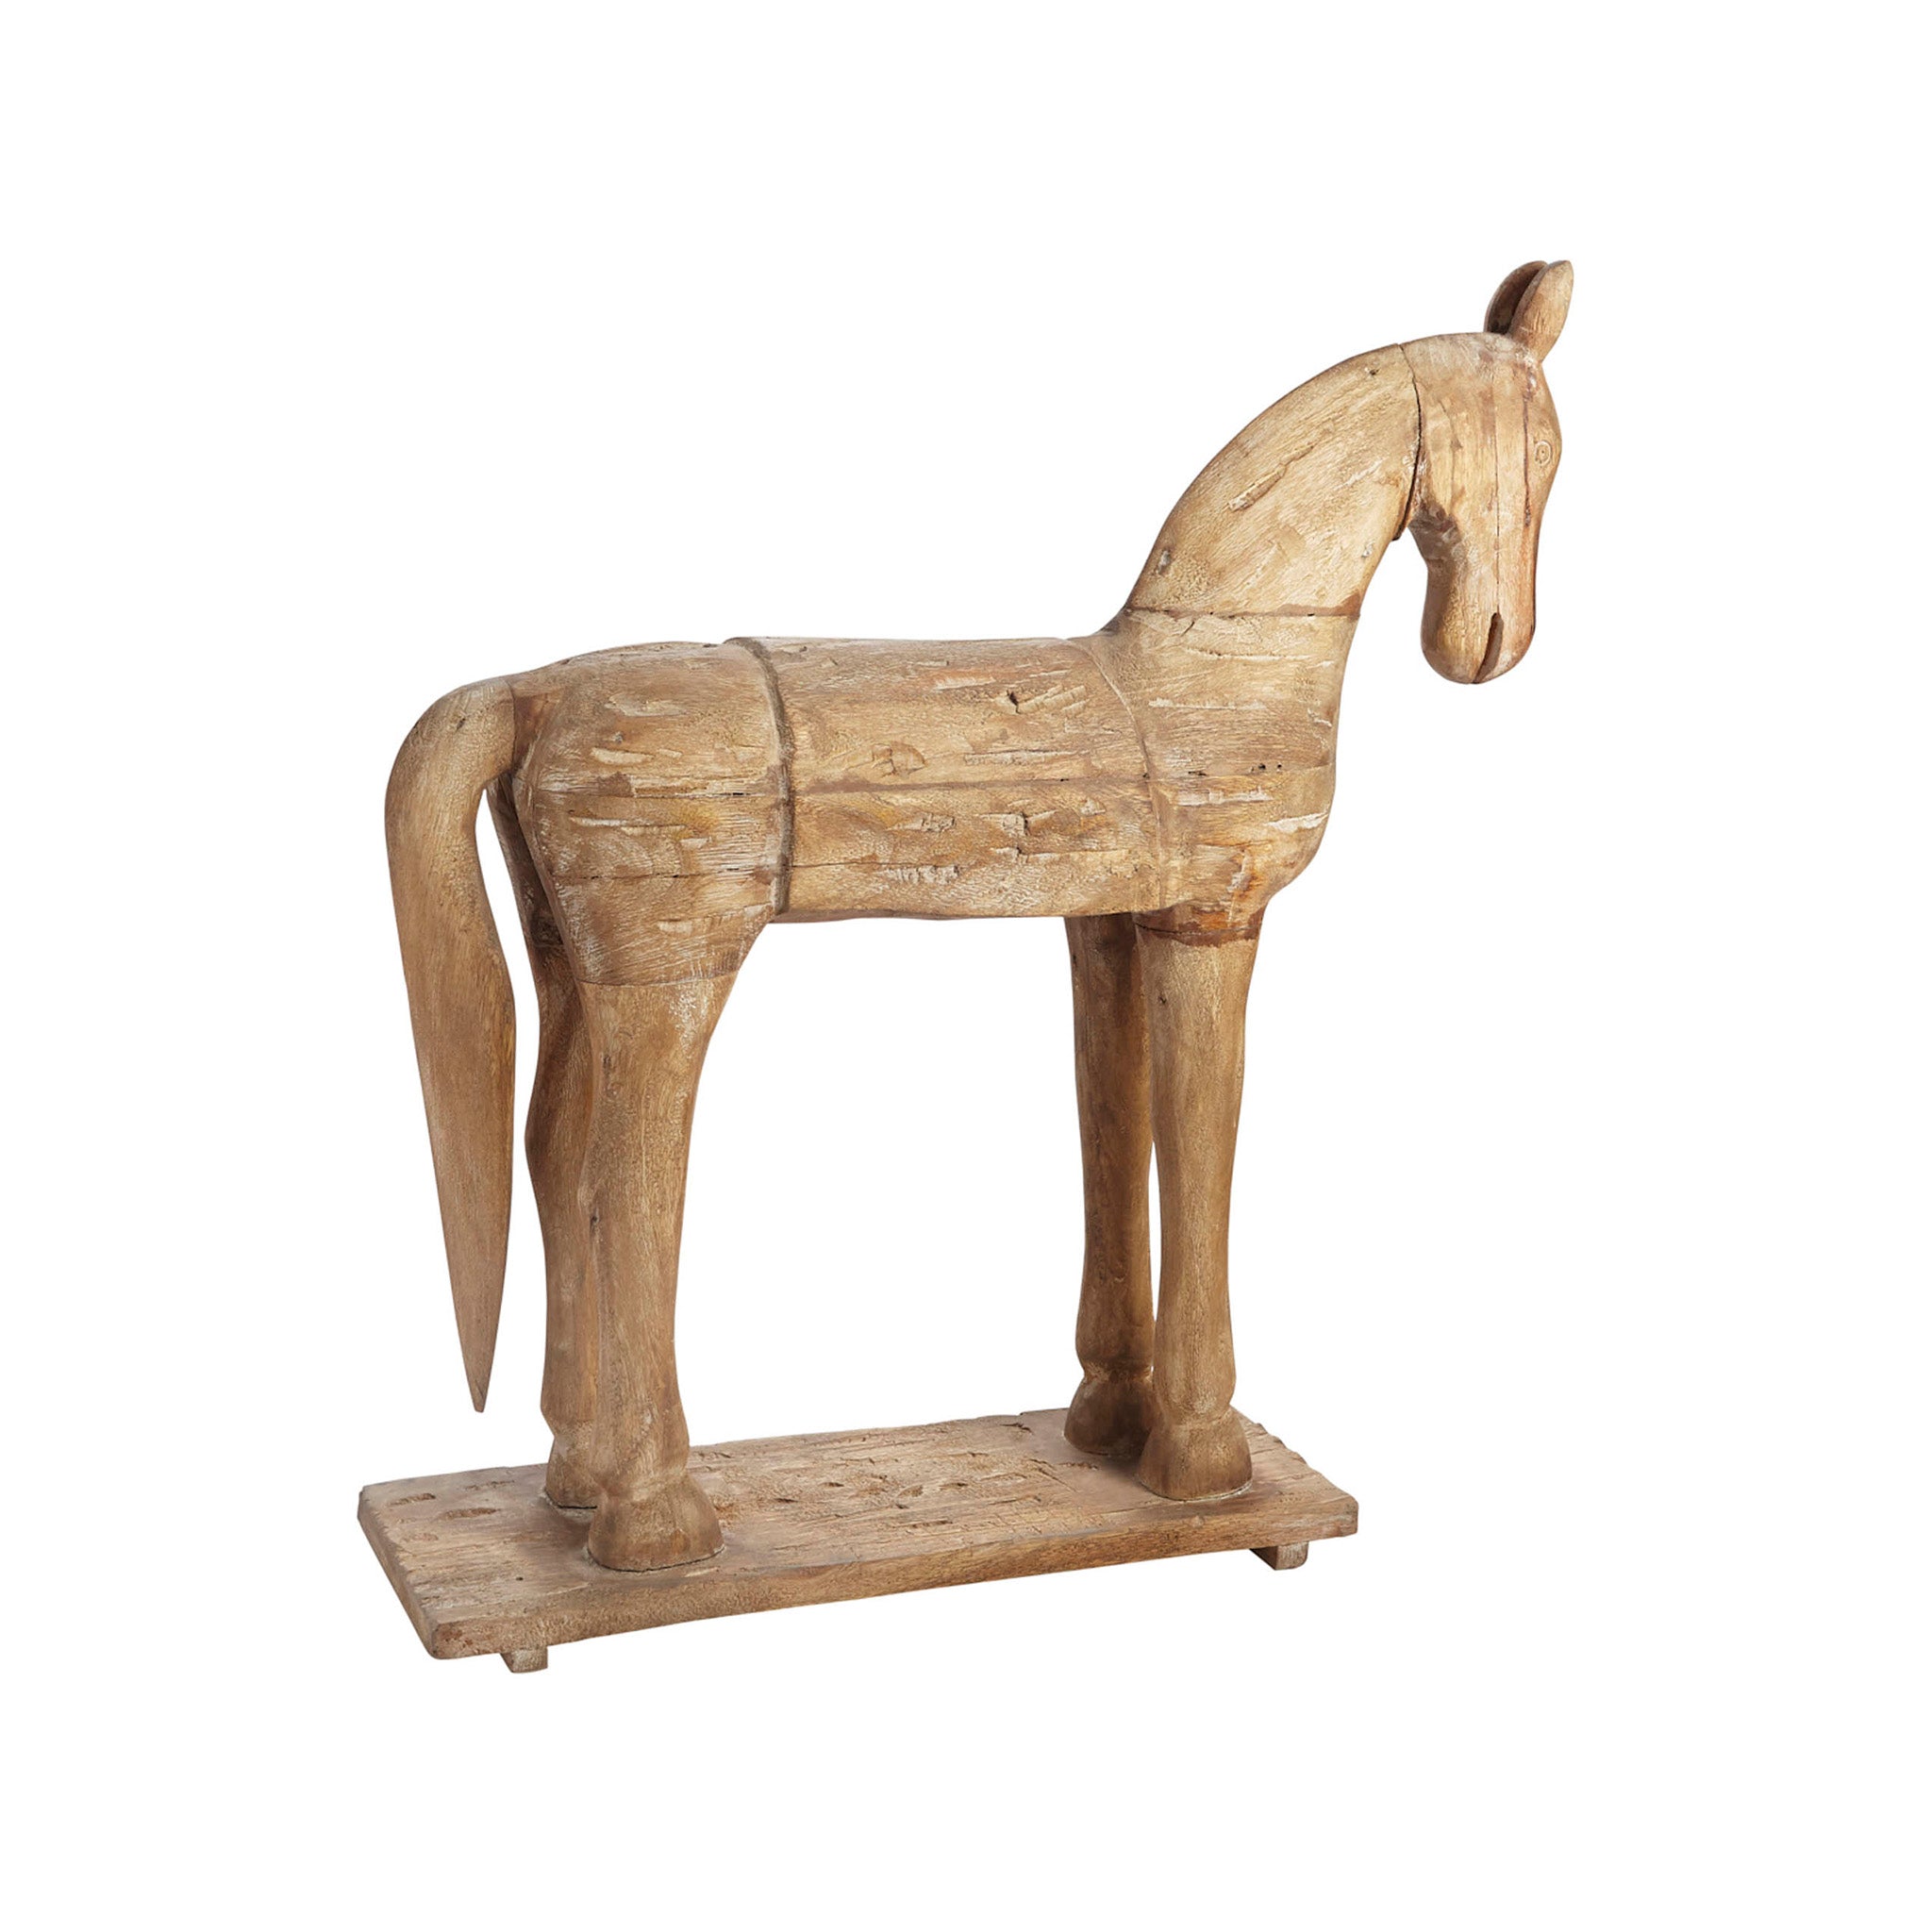 Hand-Carved Trojan Horse on Stand